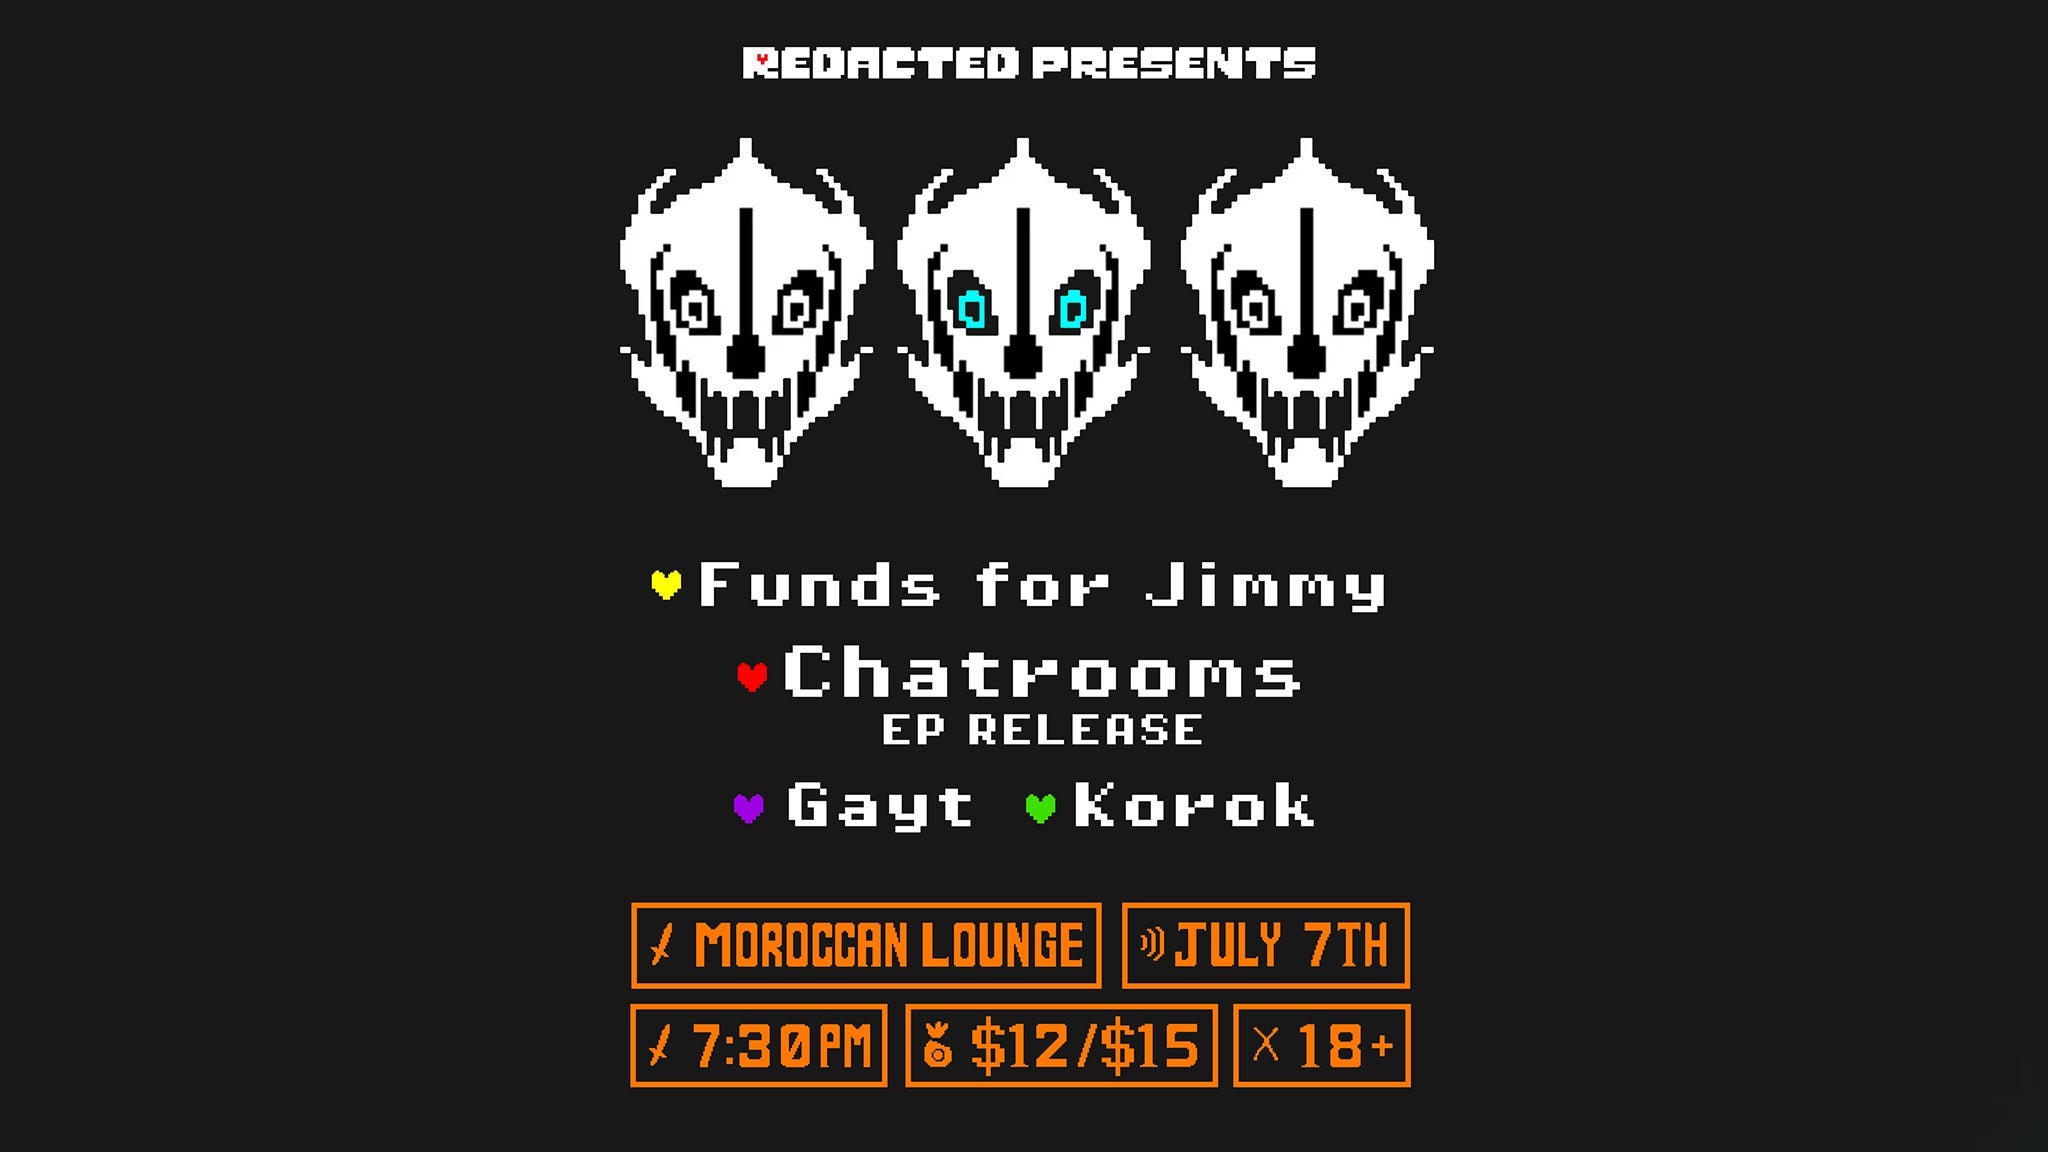 redacted presents: Funds for Jimmy